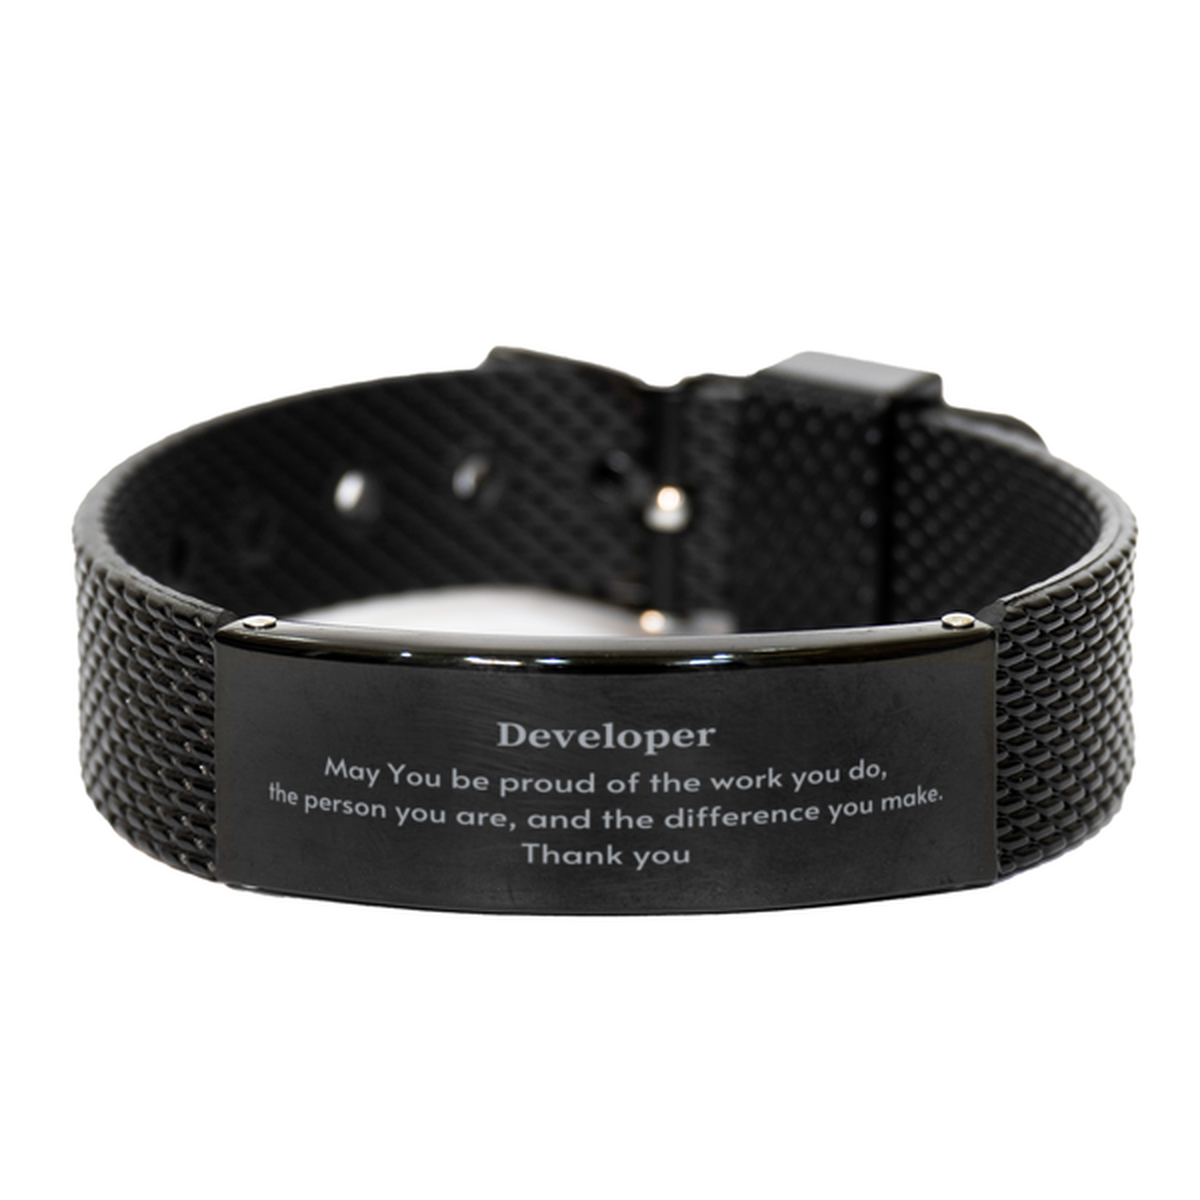 Heartwarming Black Shark Mesh Bracelet Retirement Coworkers Gifts for Developer, Developer May You be proud of the work you do, the person you are Gifts for Boss Men Women Friends